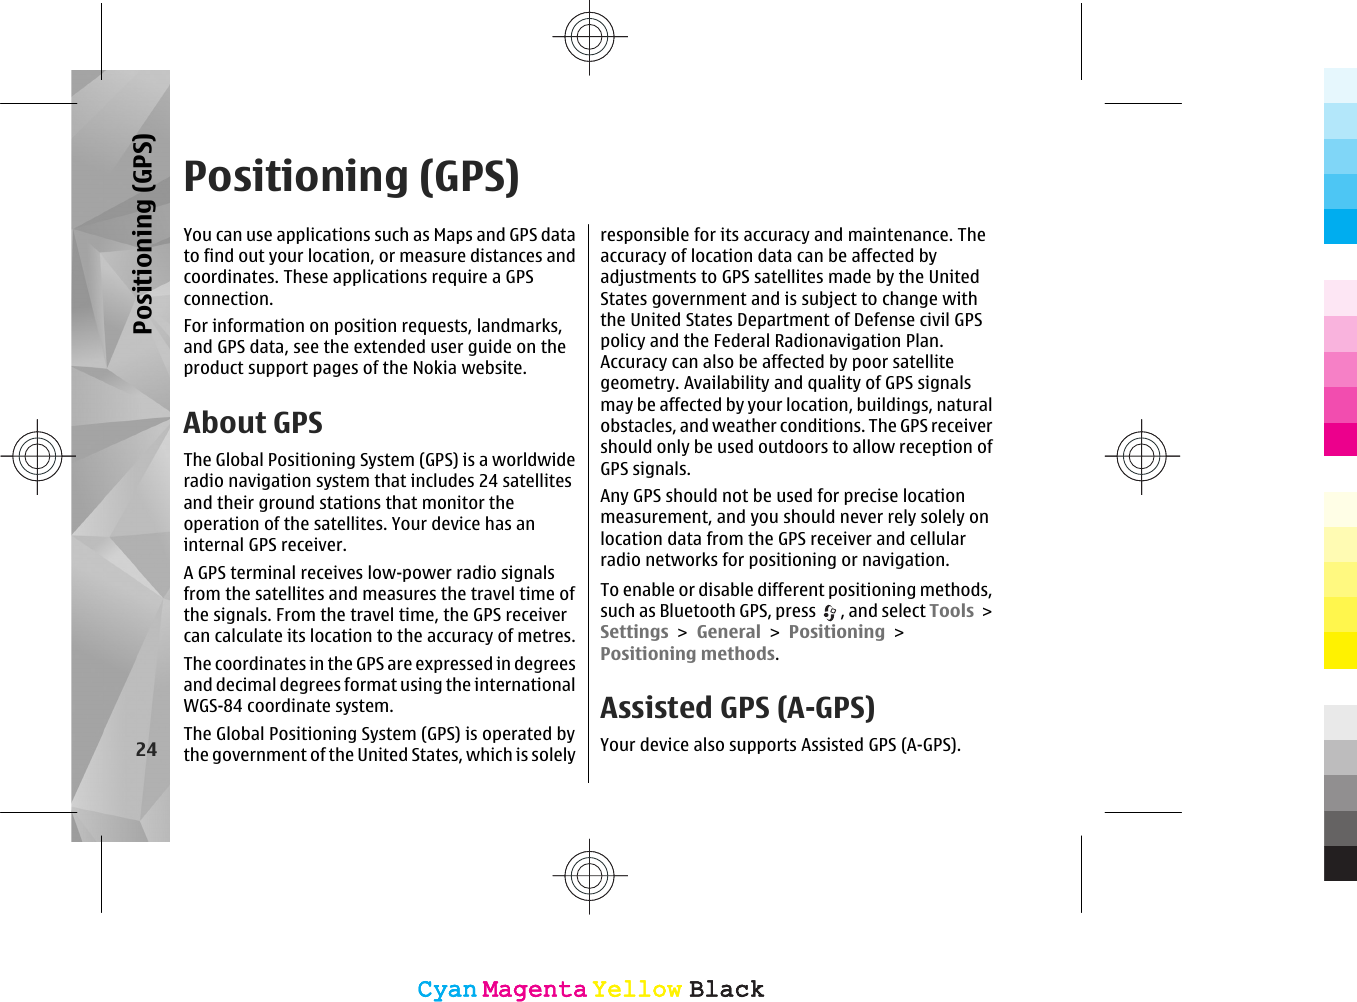 Positioning (GPS)You can use applications such as Maps and GPS datato find out your location, or measure distances andcoordinates. These applications require a GPSconnection.For information on position requests, landmarks,and GPS data, see the extended user guide on theproduct support pages of the Nokia website.About GPSThe Global Positioning System (GPS) is a worldwideradio navigation system that includes 24 satellitesand their ground stations that monitor theoperation of the satellites. Your device has aninternal GPS receiver.A GPS terminal receives low-power radio signalsfrom the satellites and measures the travel time ofthe signals. From the travel time, the GPS receivercan calculate its location to the accuracy of metres.The coordinates in the GPS are expressed in degreesand decimal degrees format using the internationalWGS-84 coordinate system.The Global Positioning System (GPS) is operated bythe government of the United States, which is solelyresponsible for its accuracy and maintenance. Theaccuracy of location data can be affected byadjustments to GPS satellites made by the UnitedStates government and is subject to change withthe United States Department of Defense civil GPSpolicy and the Federal Radionavigation Plan.Accuracy can also be affected by poor satellitegeometry. Availability and quality of GPS signalsmay be affected by your location, buildings, naturalobstacles, and weather conditions. The GPS receivershould only be used outdoors to allow reception ofGPS signals.Any GPS should not be used for precise locationmeasurement, and you should never rely solely onlocation data from the GPS receiver and cellularradio networks for positioning or navigation.To enable or disable different positioning methods,such as Bluetooth GPS, press  , and select Tools &gt;Settings &gt; General &gt; Positioning &gt;Positioning methods.Assisted GPS (A-GPS)Your device also supports Assisted GPS (A-GPS).24Positioning (GPS)CyanCyanMagentaMagentaYellowYellowBlackBlackCyanCyanMagentaMagentaYellowYellowBlackBlack